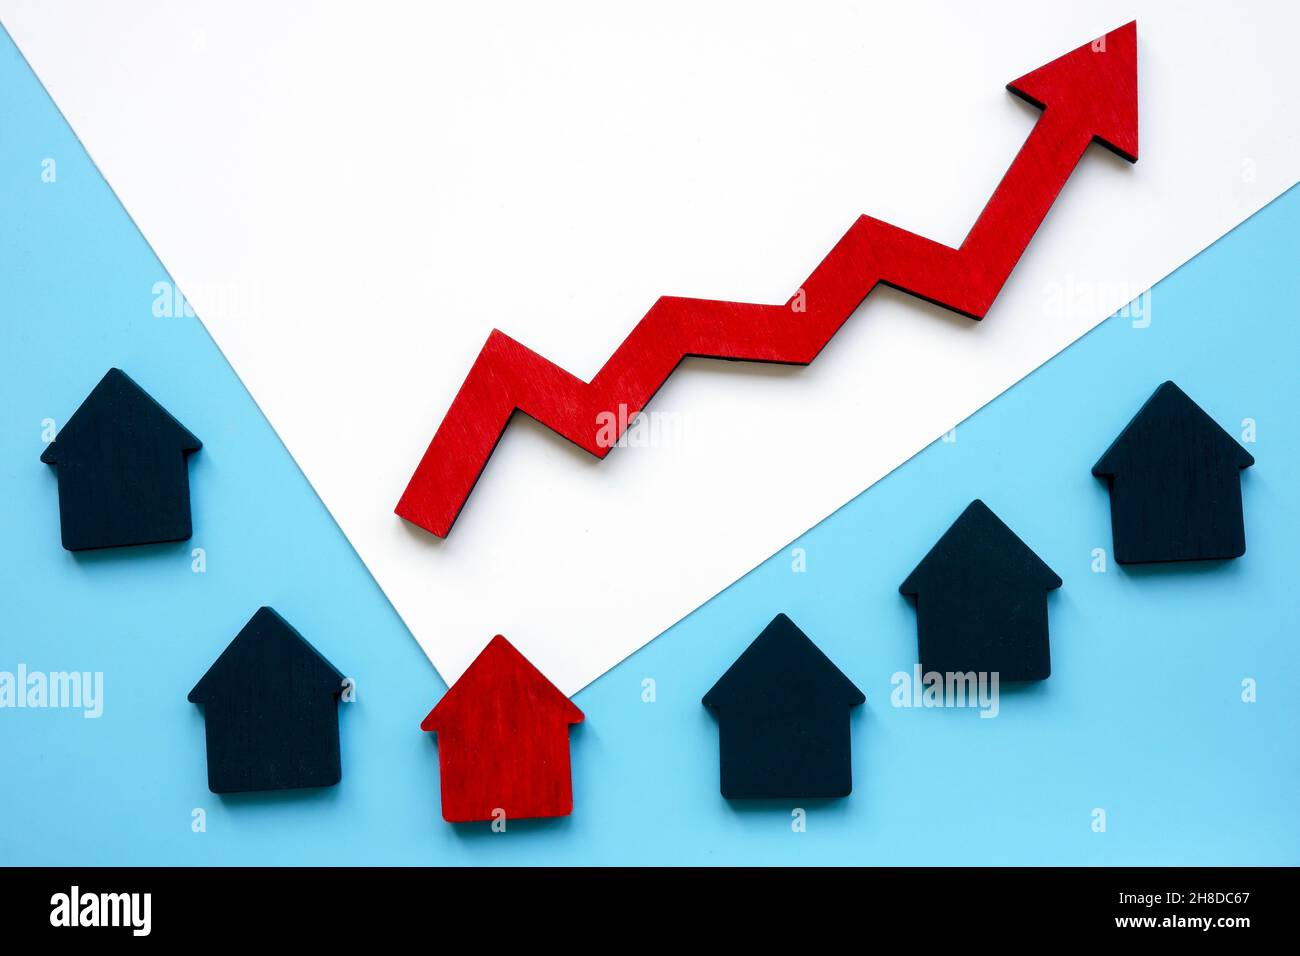 Small houses and an arrow symbolizing the rise in property prices. Real estate value. Stock Photo